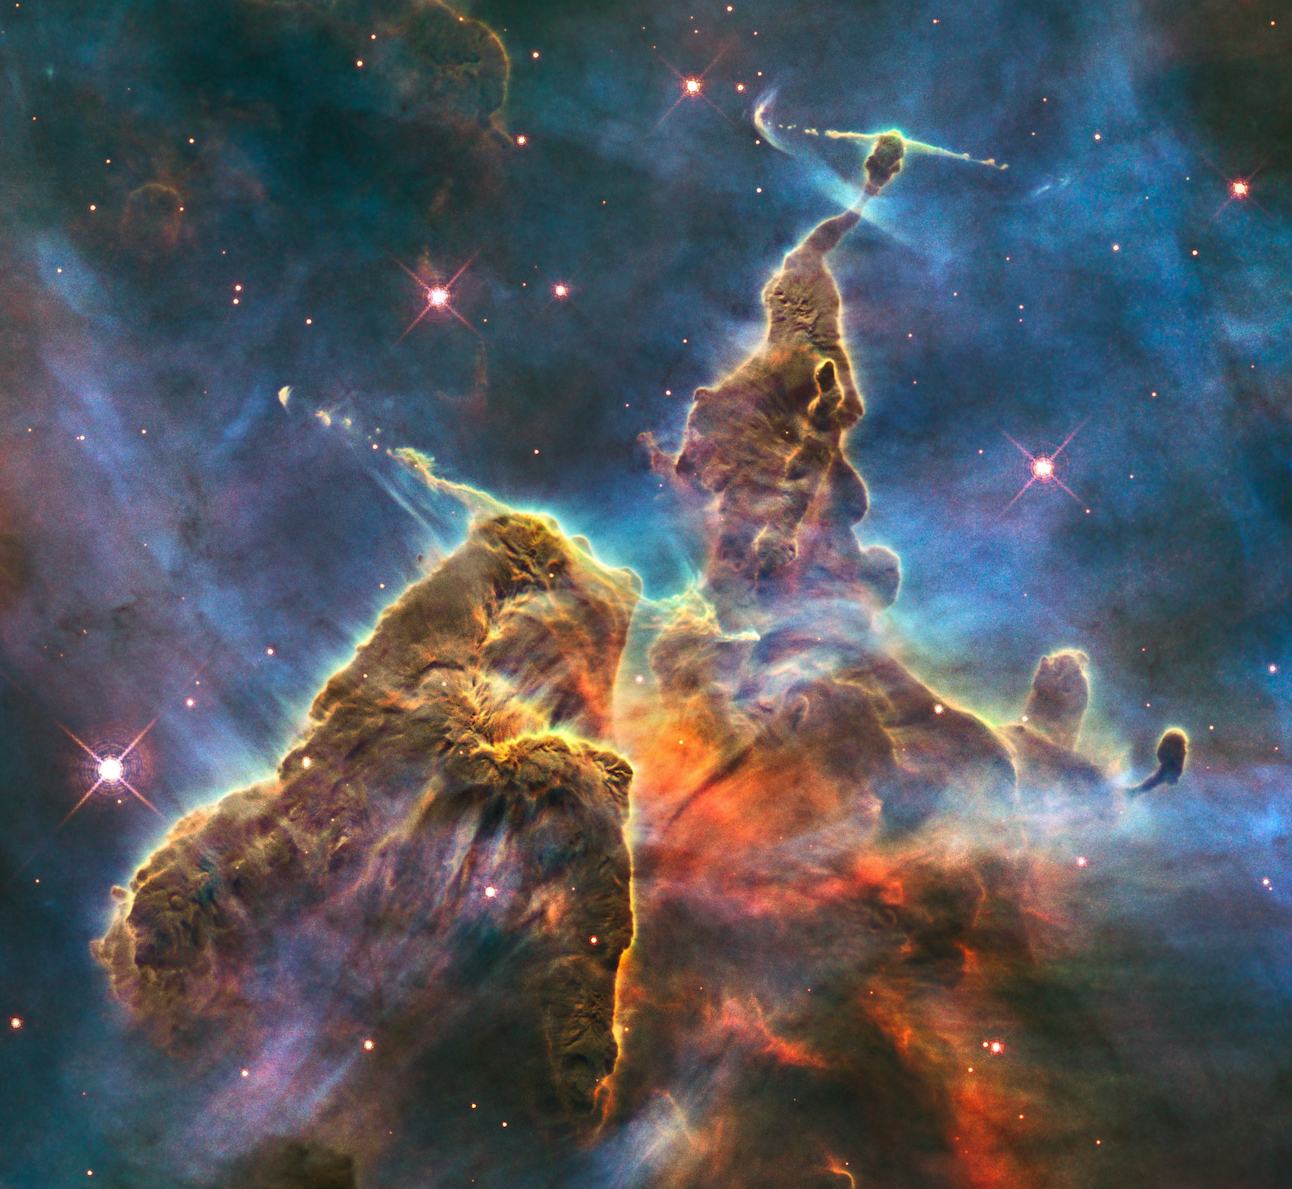 25 Spectacular Space Photos to Celebrate 25 Years of the Hubble Space